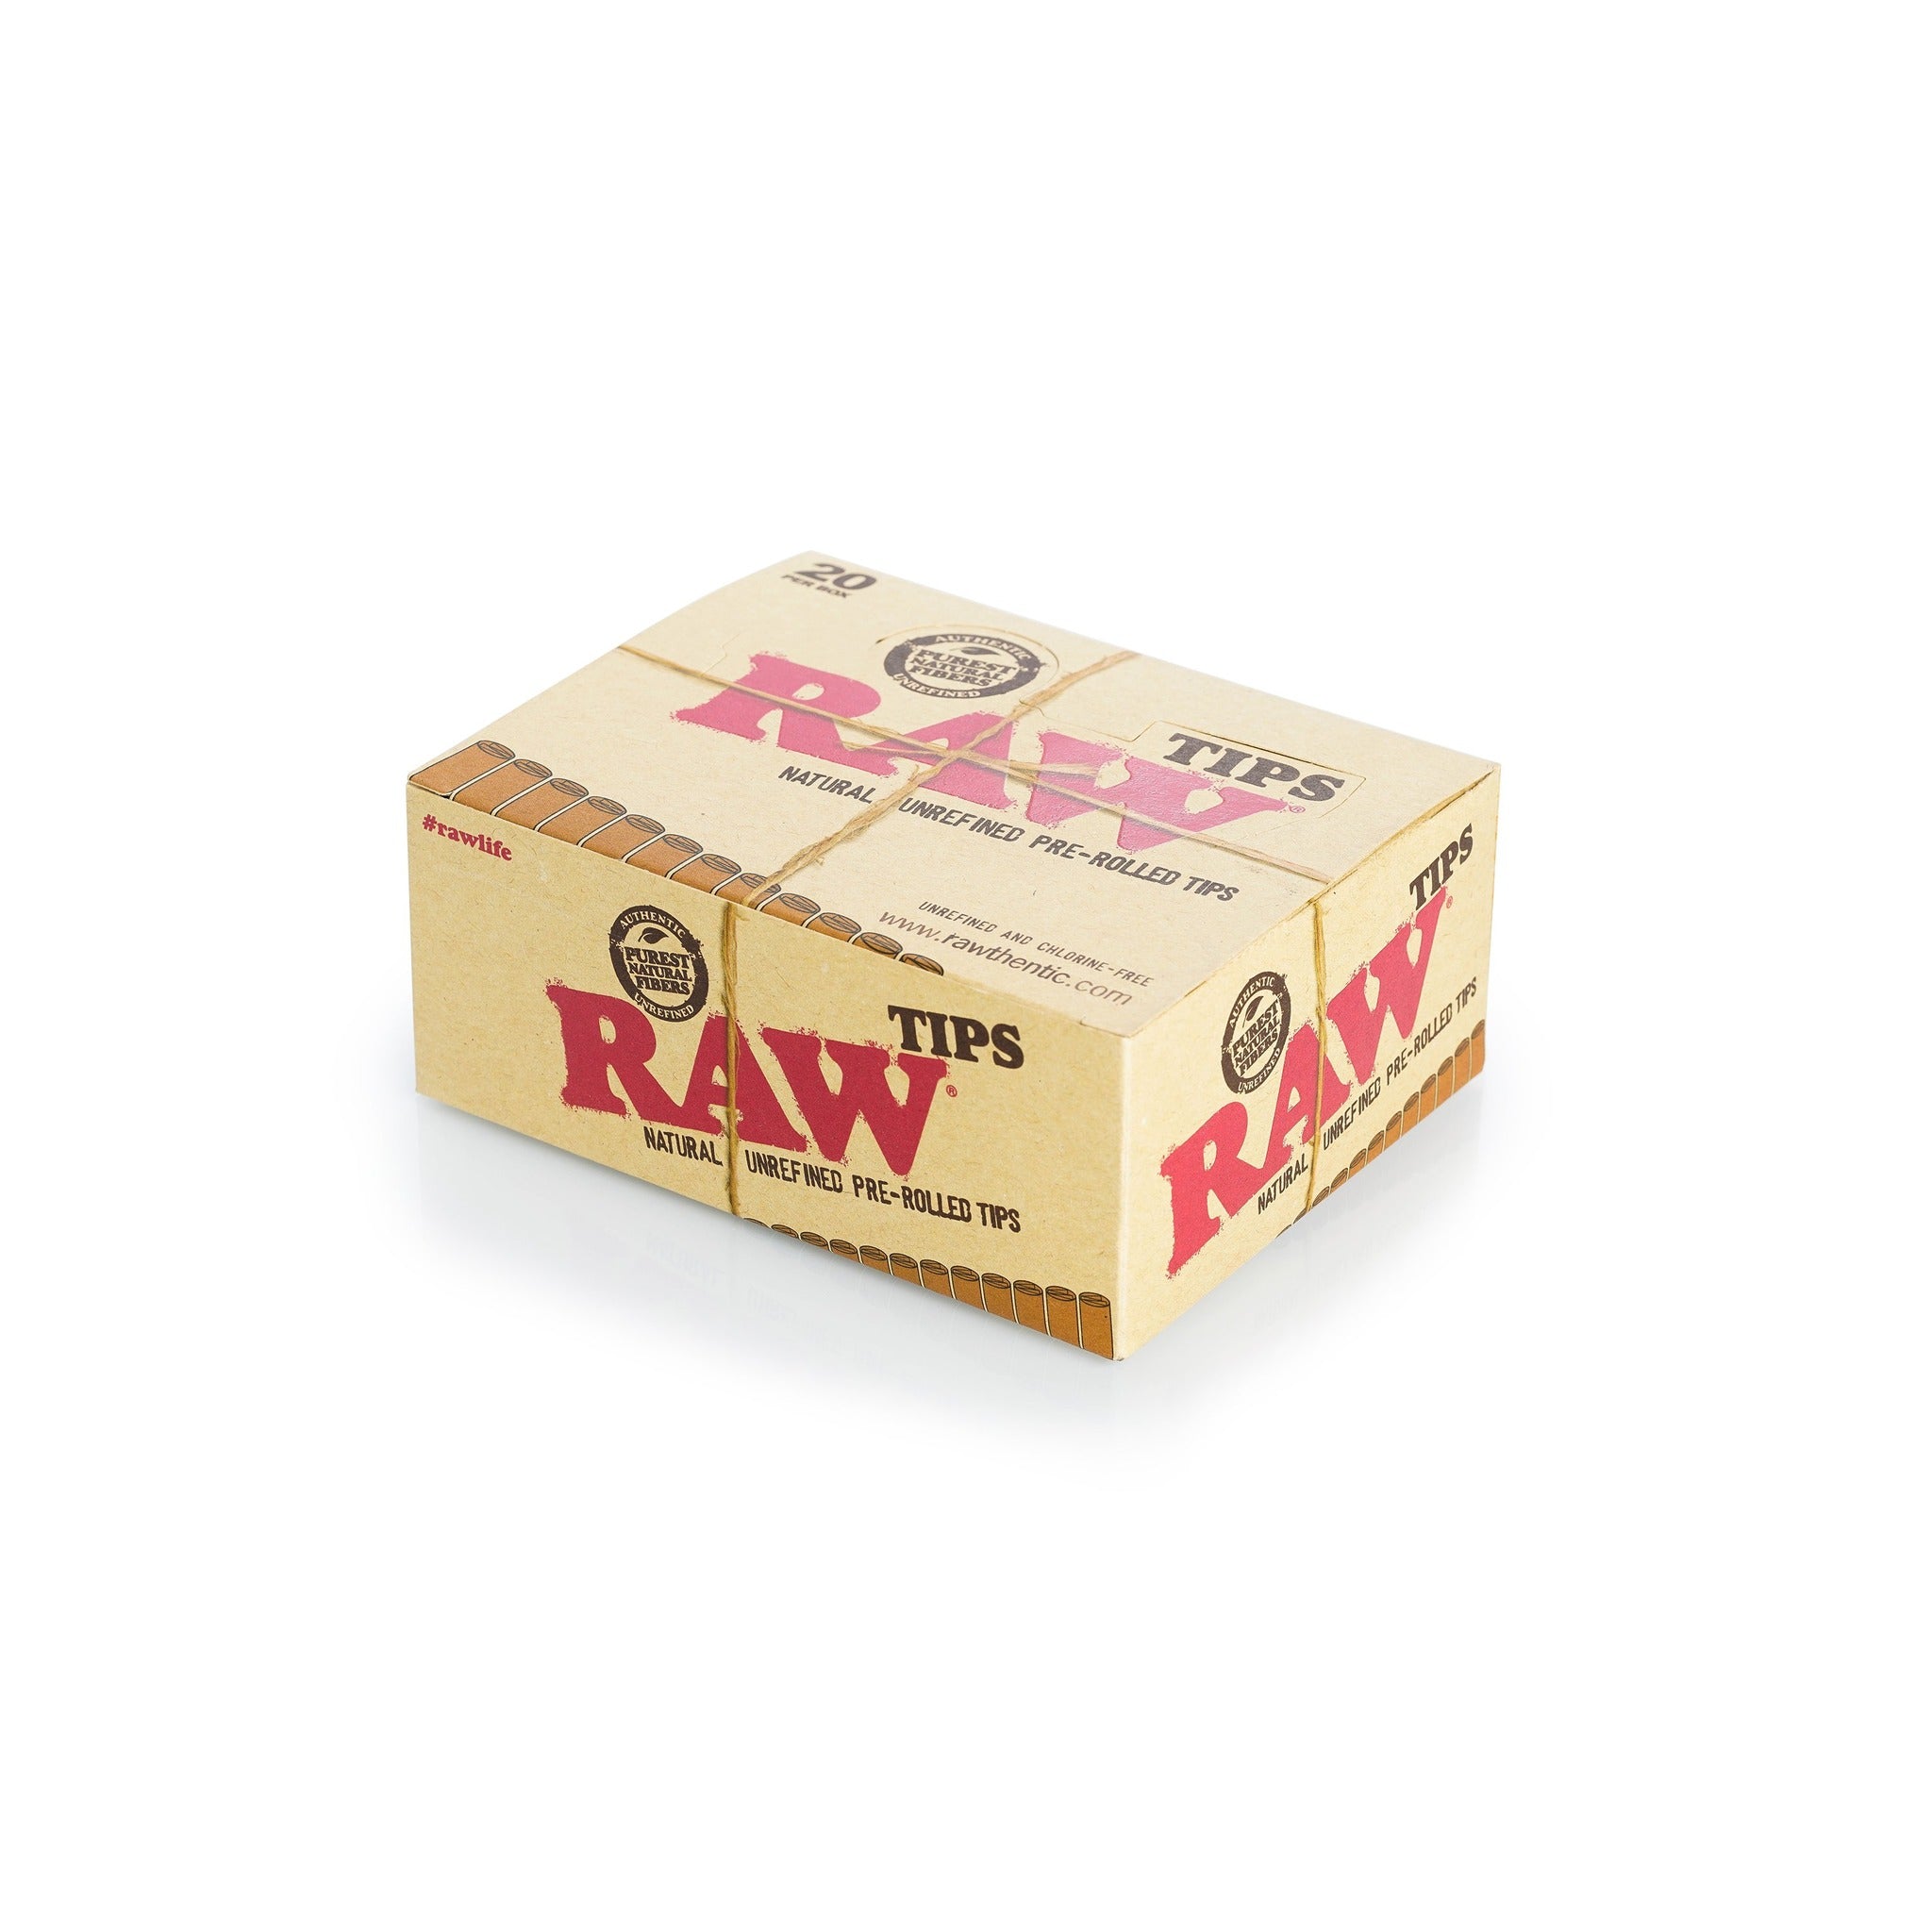 Raw 949 Unbleached Pre-Rolled Tips